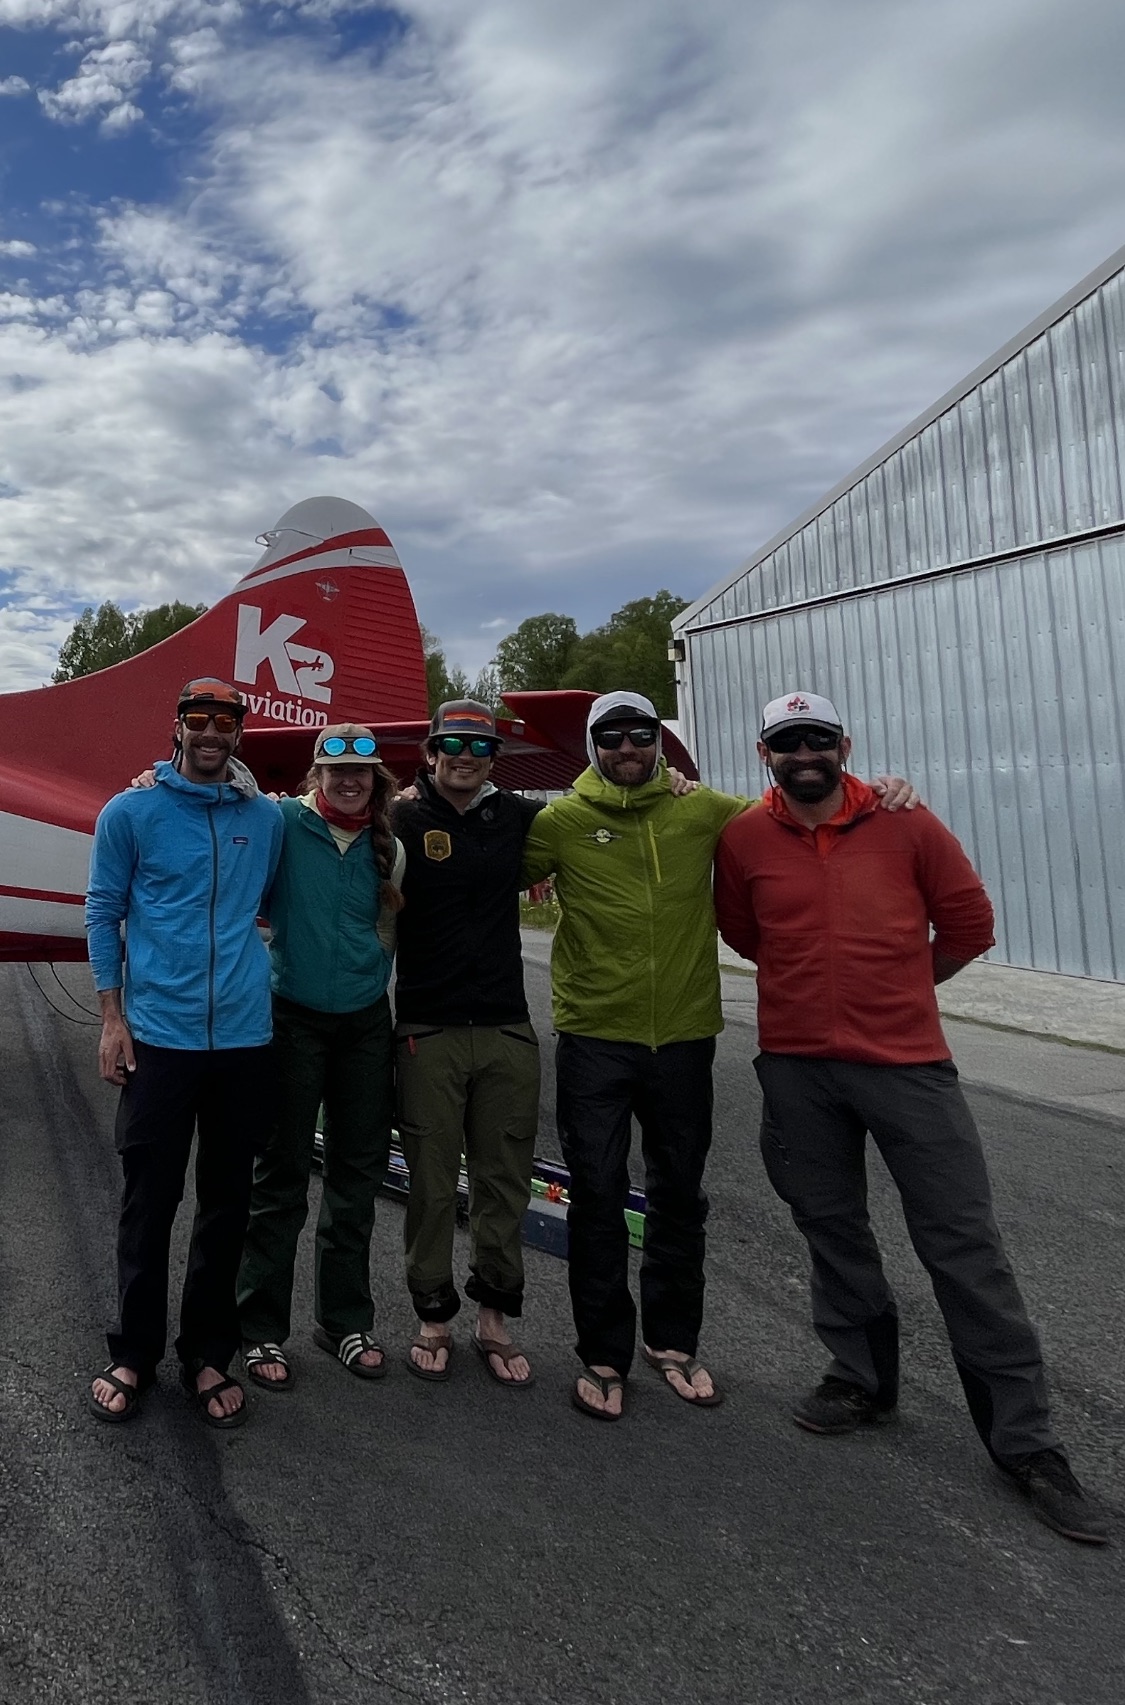 Five climbers in flip flops stand on an airport runway in front of a small aircraft